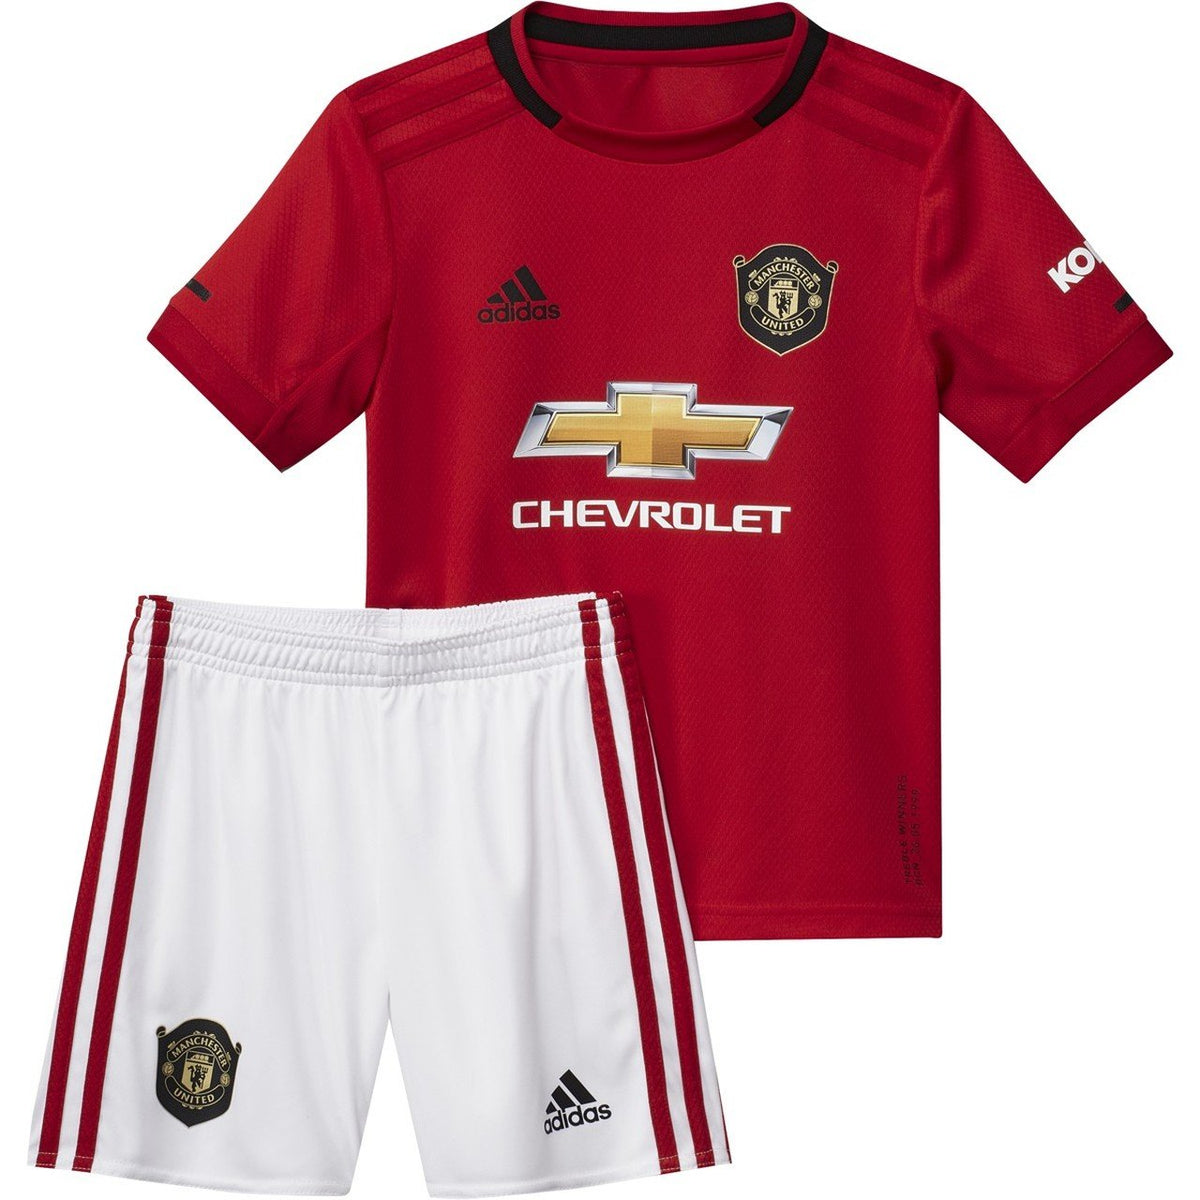 manchester united jersey shorts